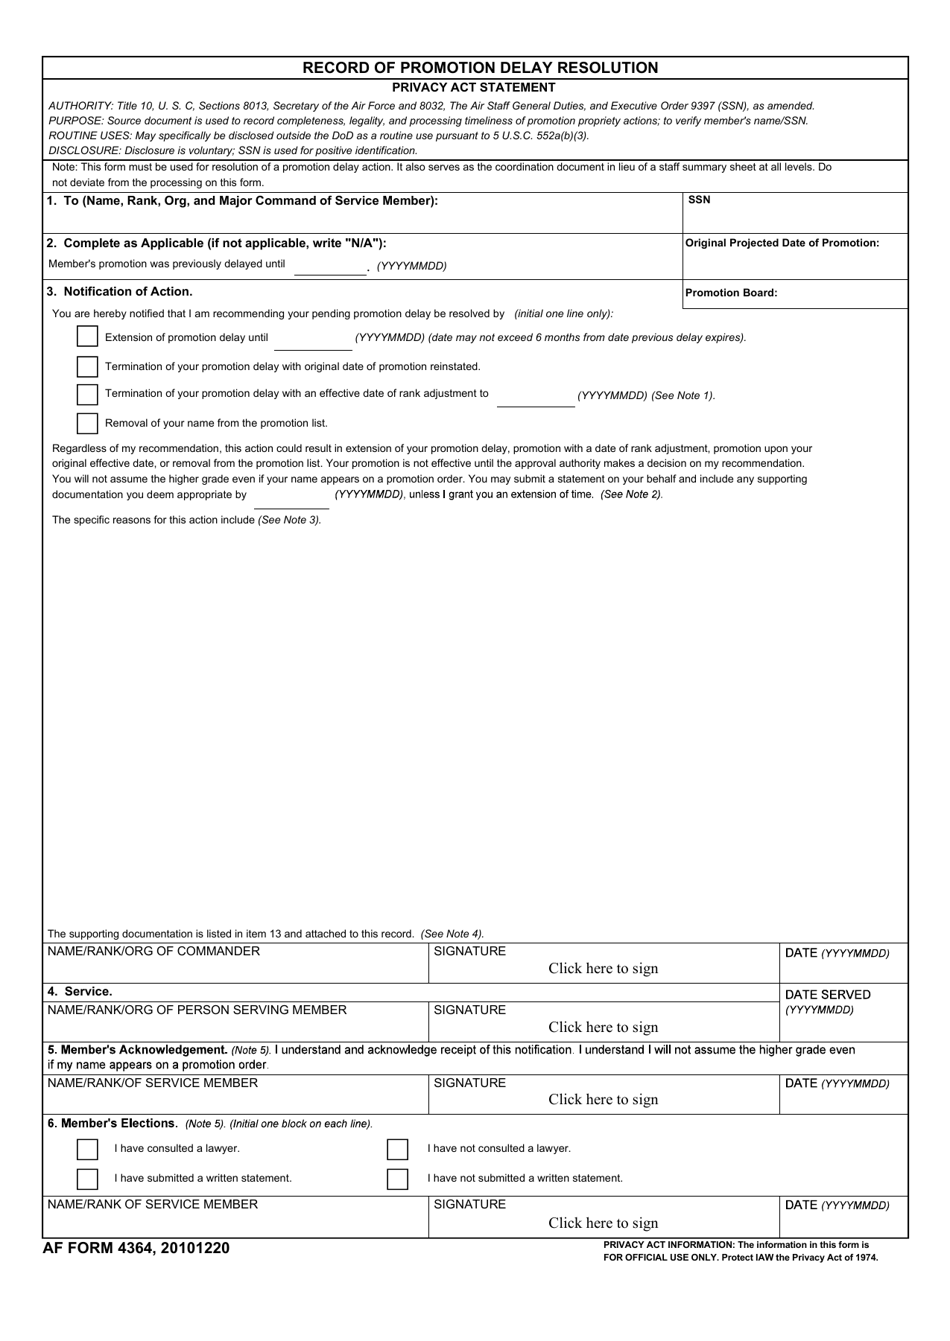 AF Form 4364 Record of Promotion Delay Resolution, Page 1